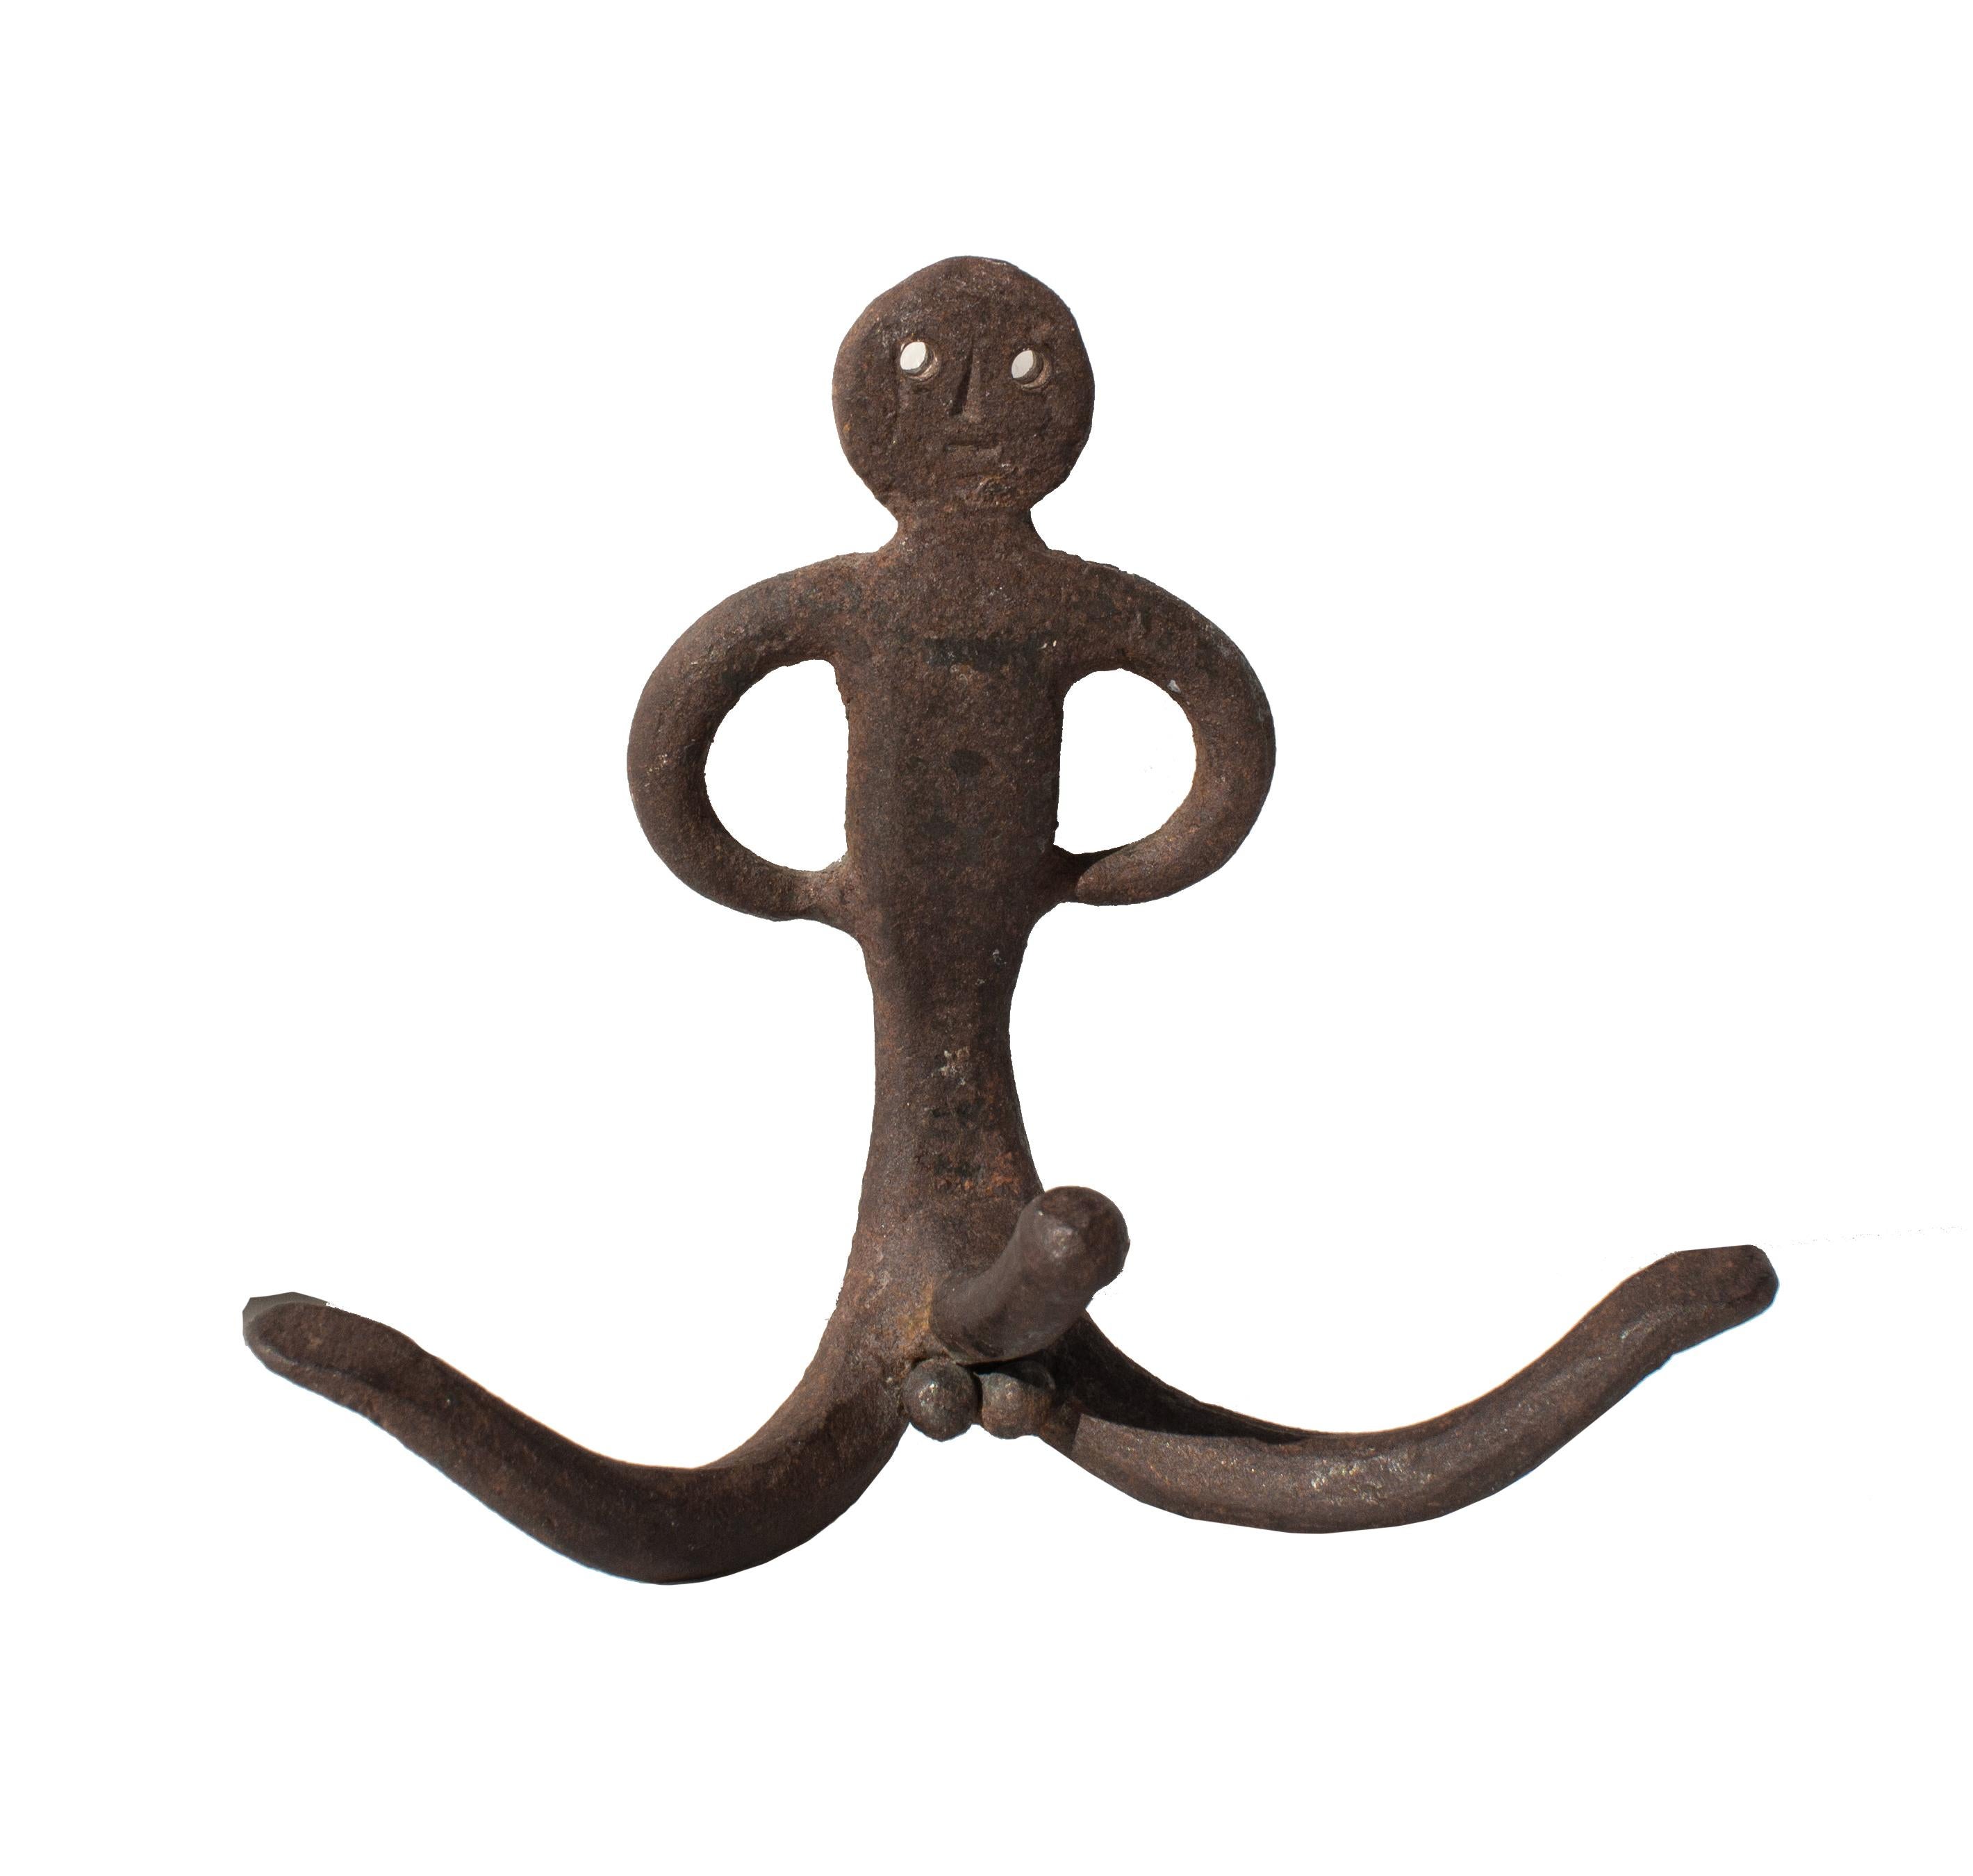 Te iron clothes hook was forged by Erik Höglund, (1932-1998), in his Studio during 1960s. The hanger was intended as a studio piece. 
Erik Höglund's work has been exhibited around the world and has had a significant impact on Swedish and